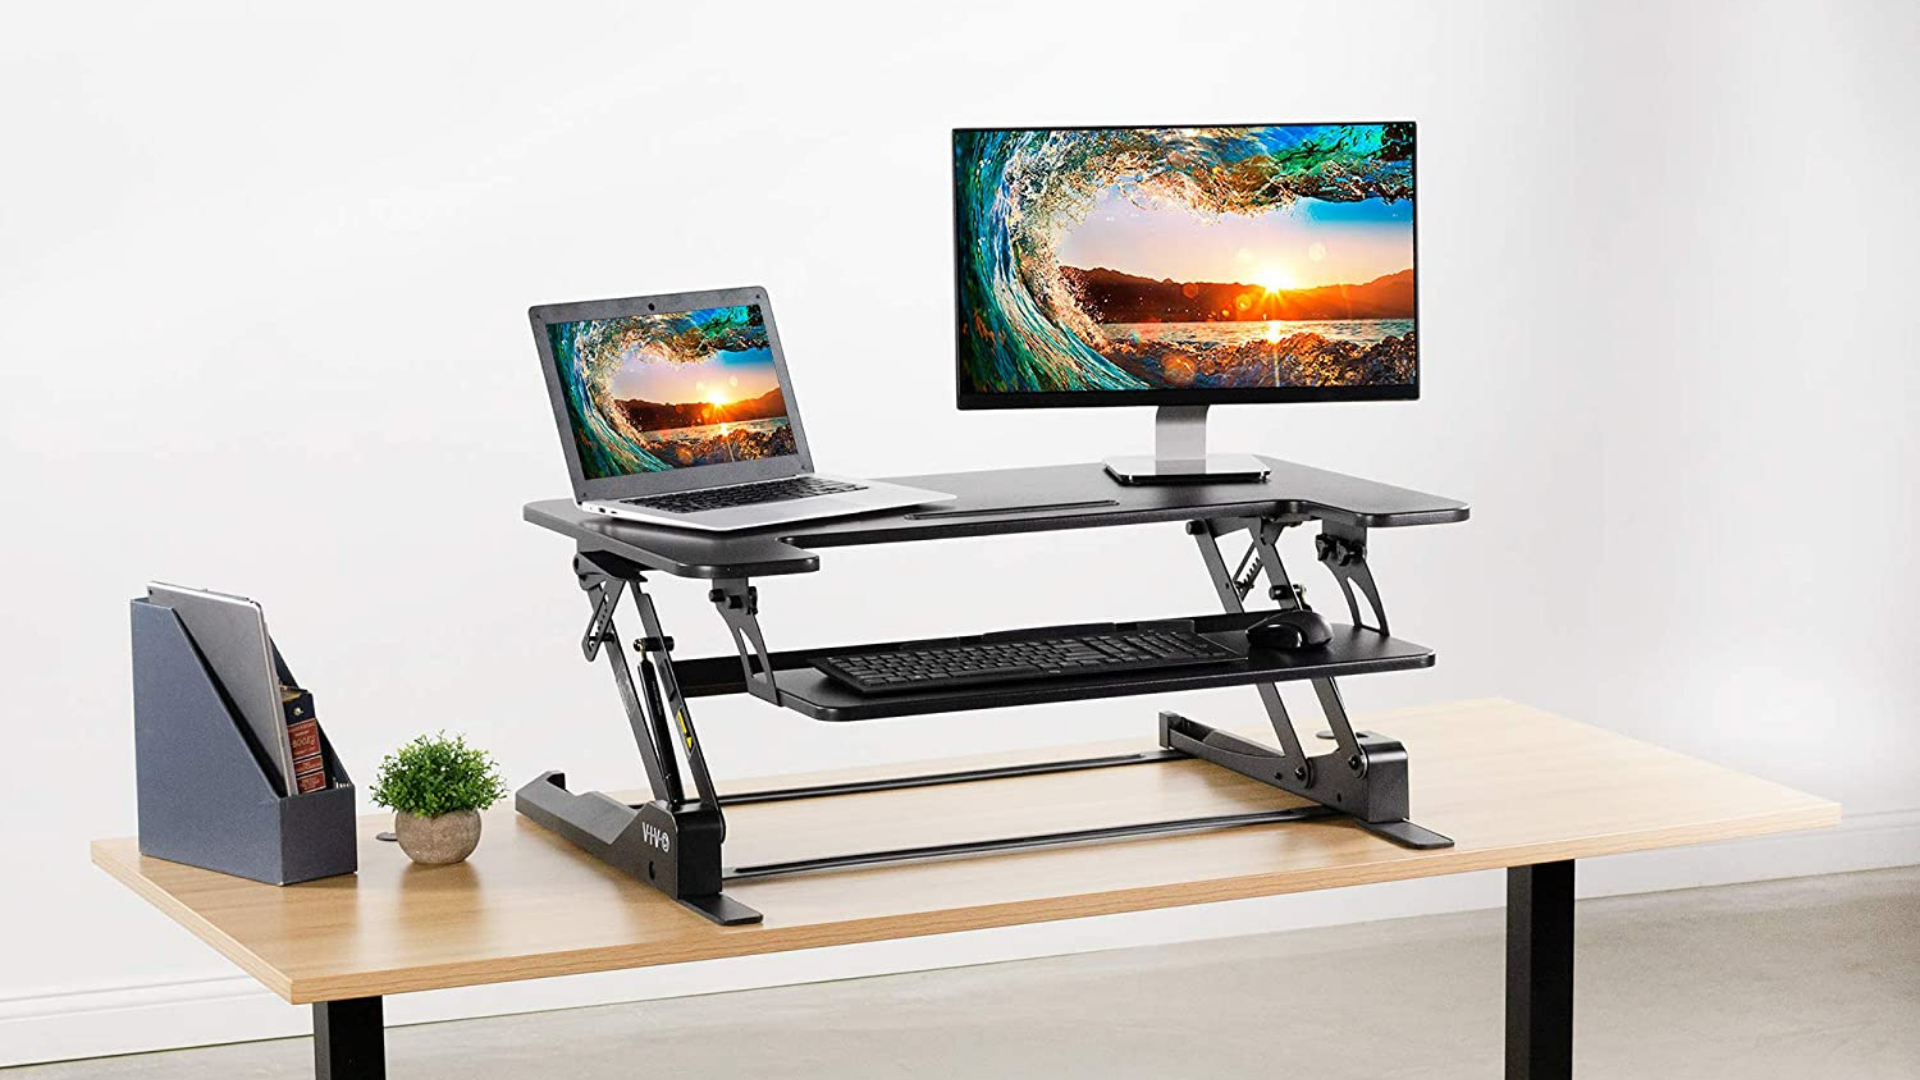 FlexiSpot E7 Bamboo Standing Desk - Stylish and Functional | 55×28 inch Bamboo Desktop & Black Frame | Stand Up Desk for Home Office